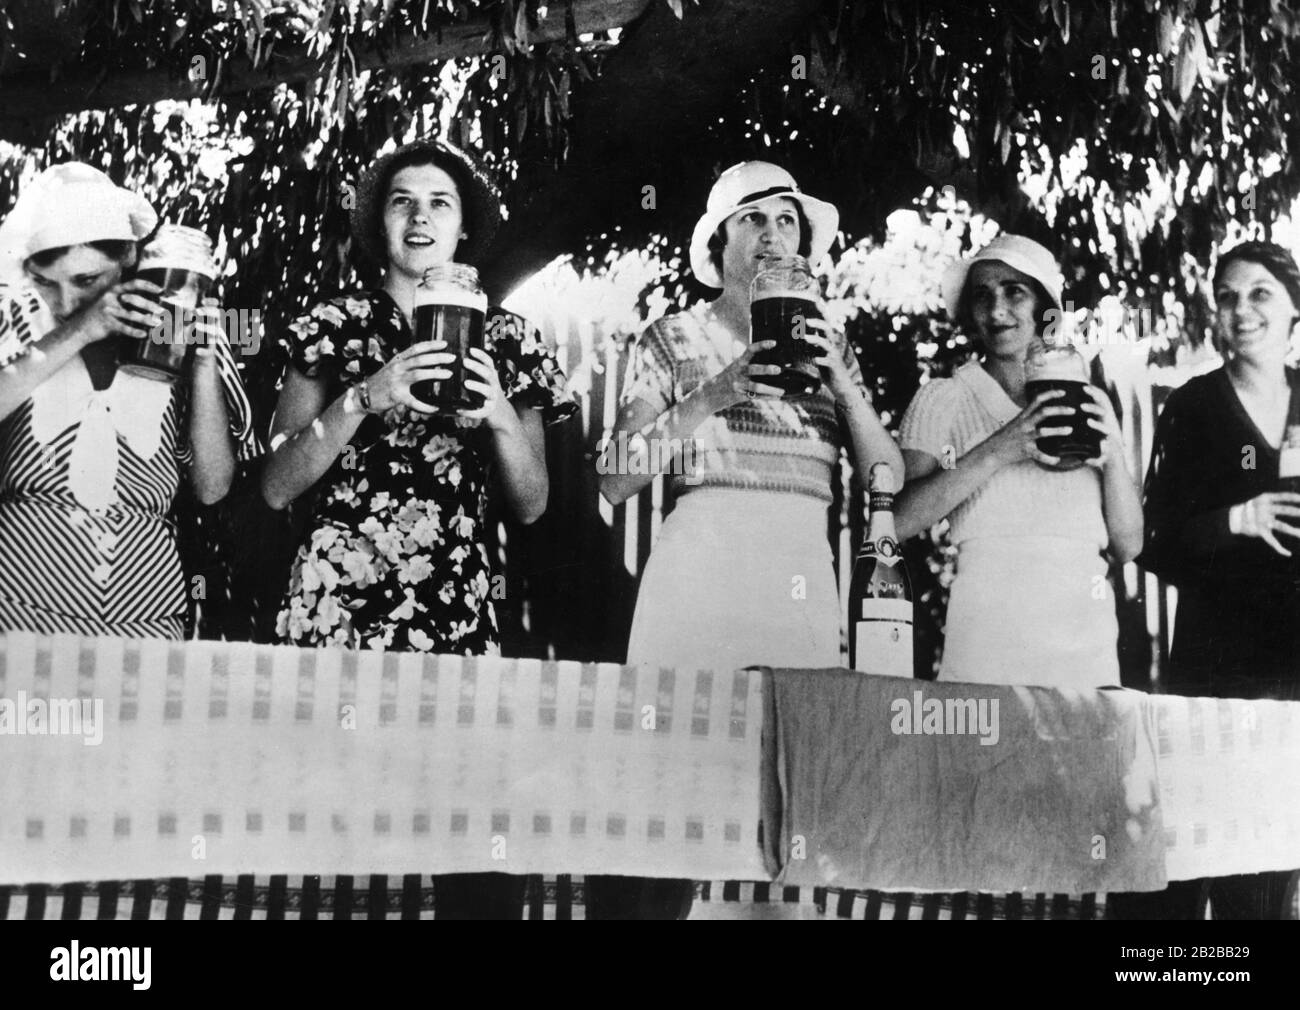 American women allow themselves a mug of beer in the Mexican border town of Tijuna during the Probition in the United States. Stock Photo